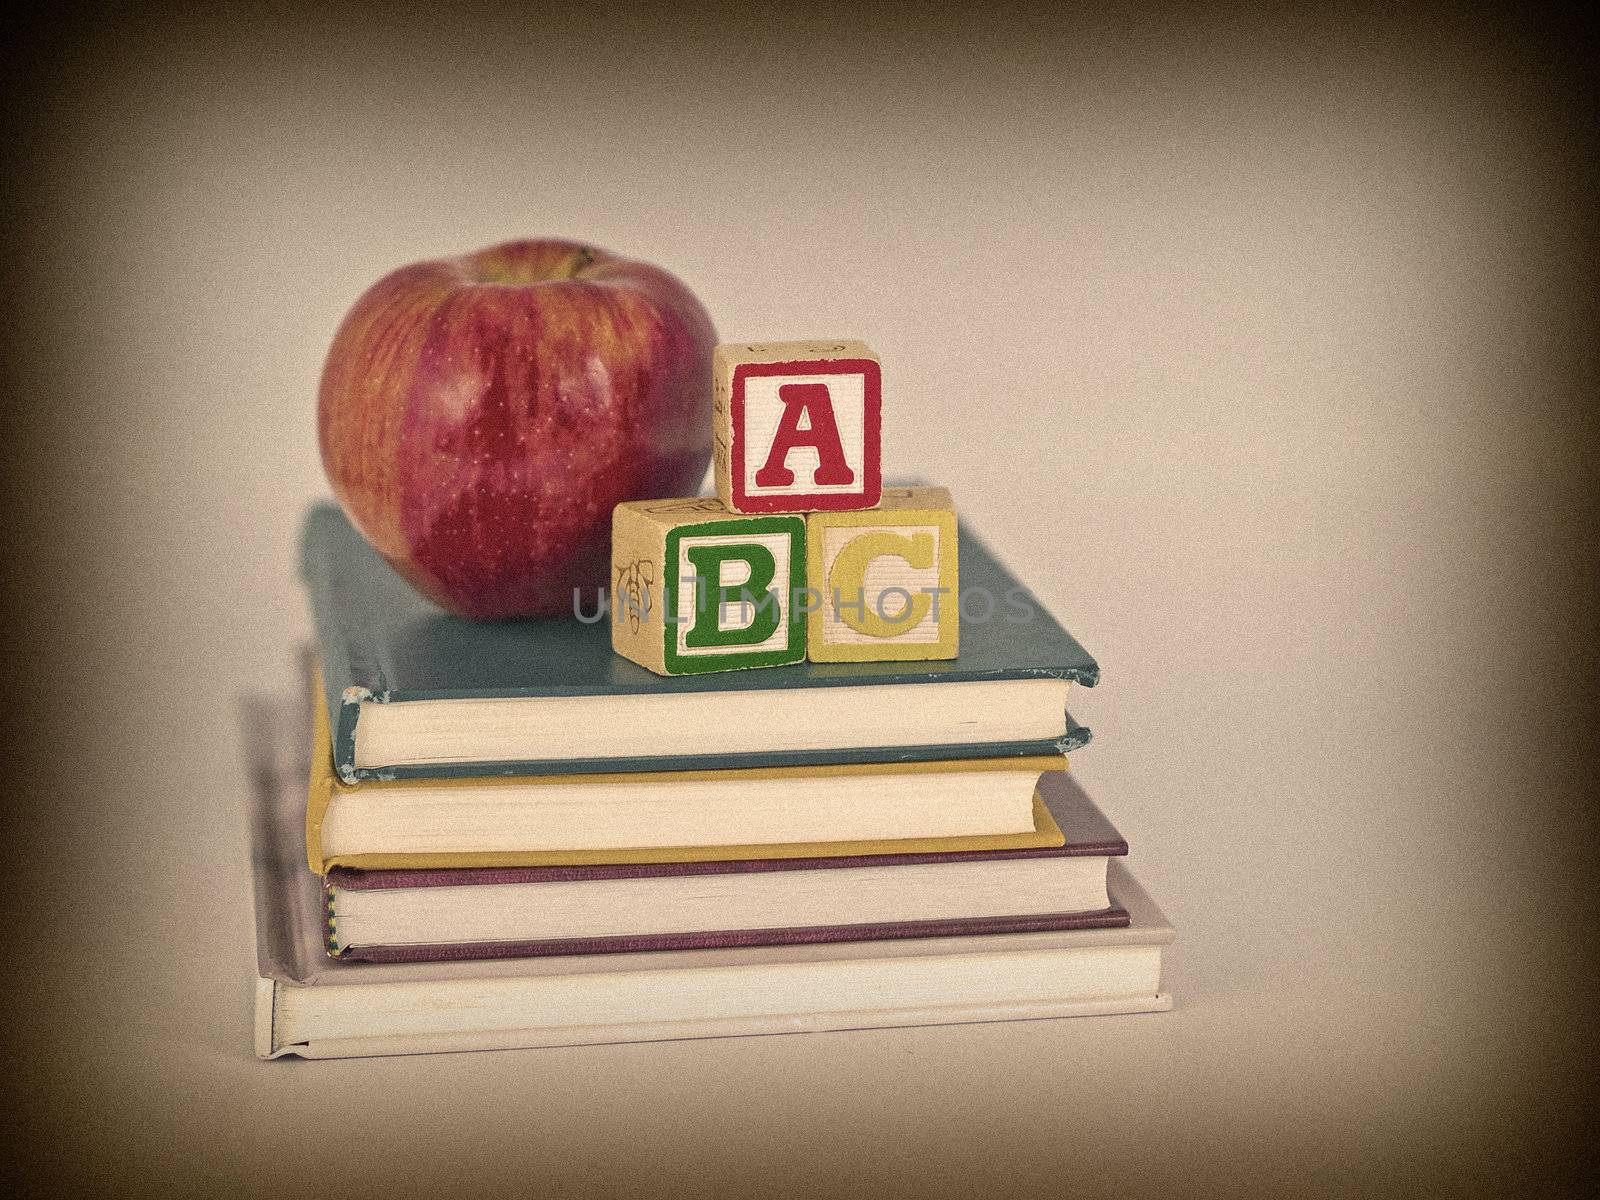 ABC Blocks and Apple on Children's Books in a Retro Vintage Style